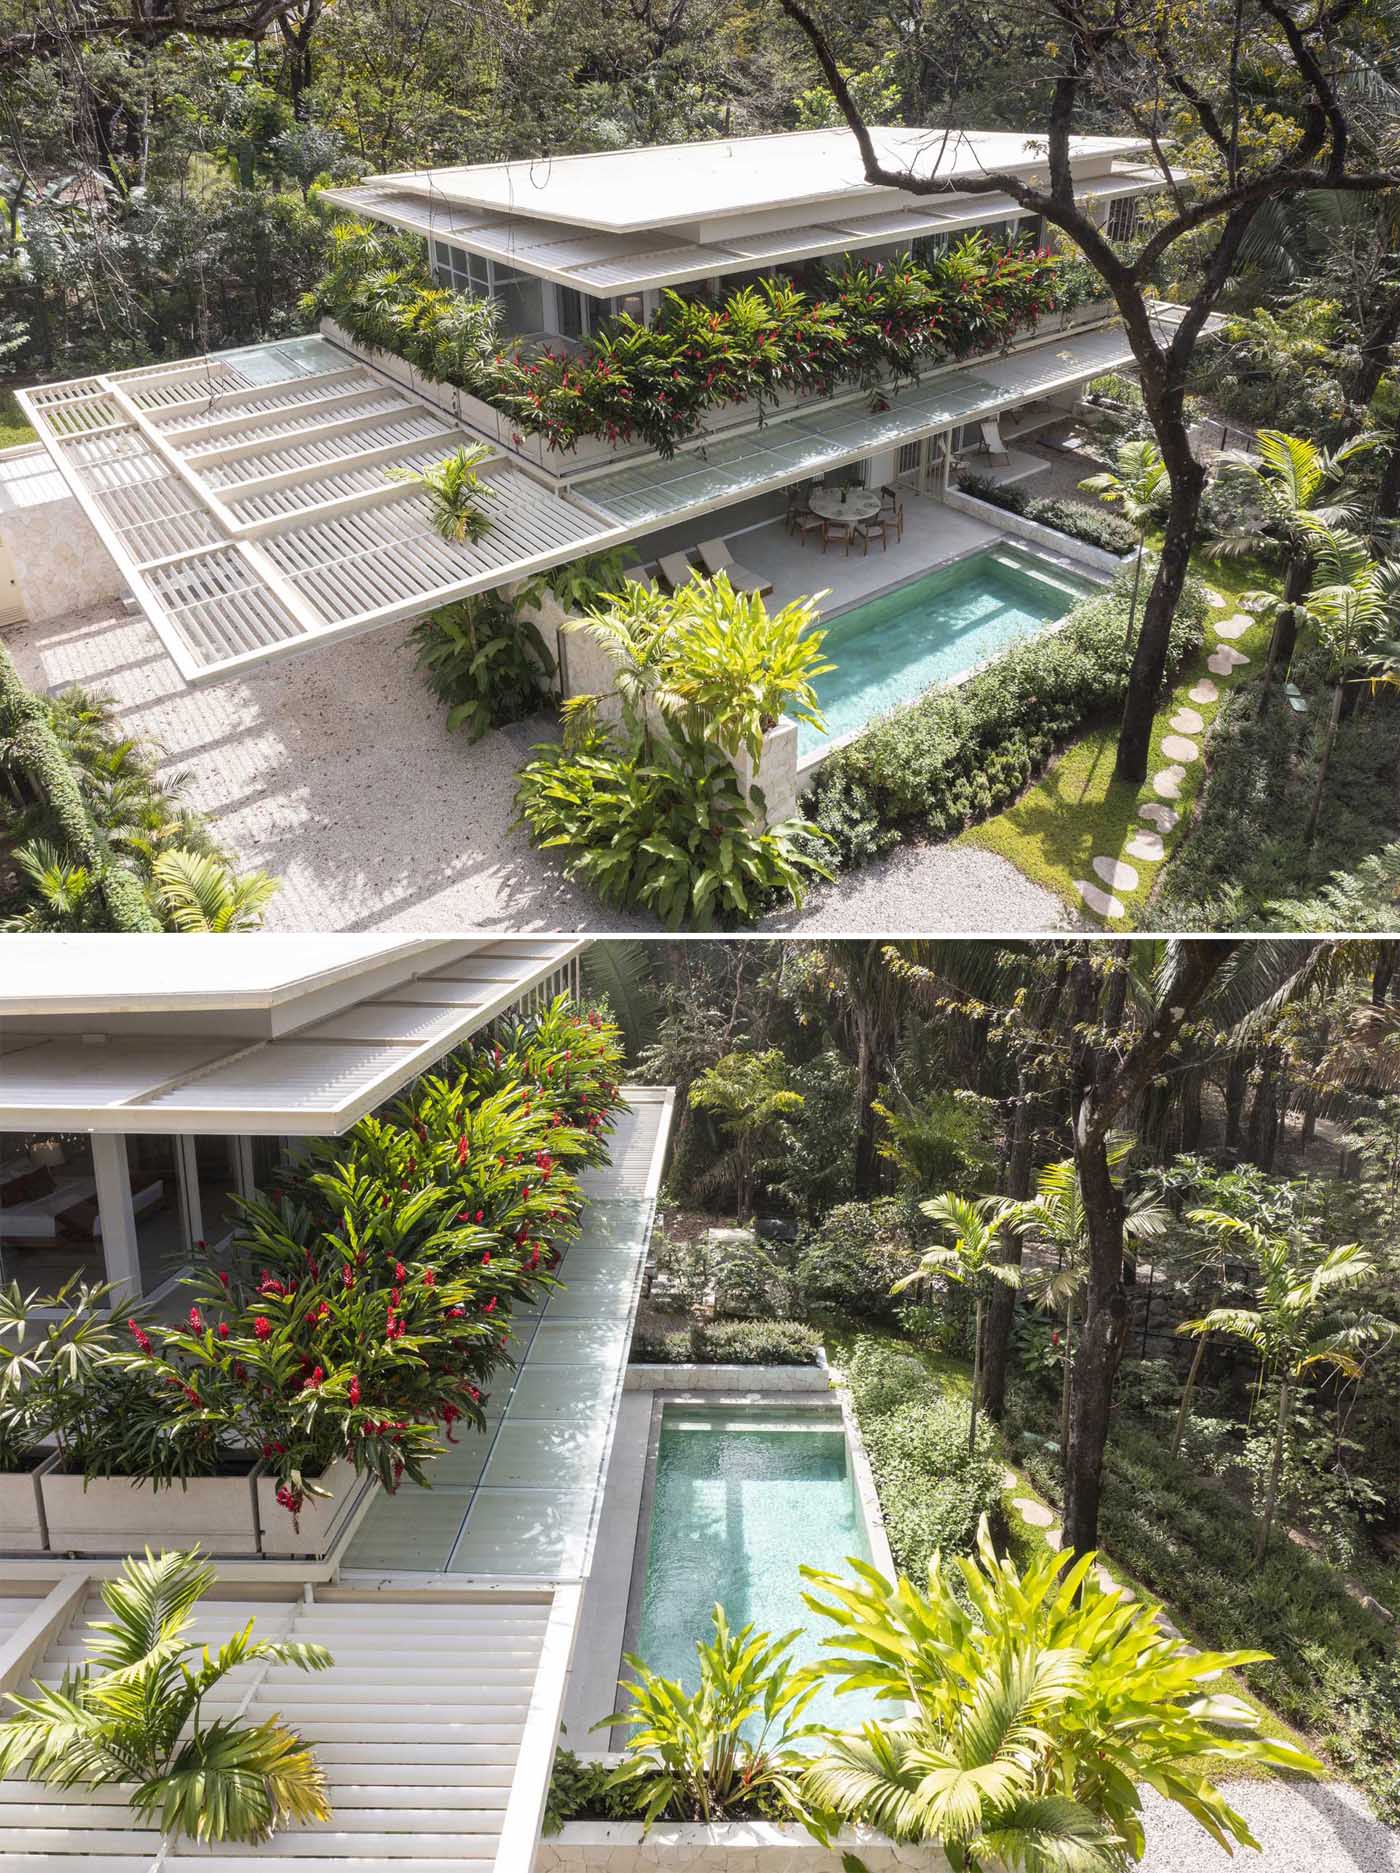 A modern home in Costa Rica has an abundance of tropical plants and a pool.